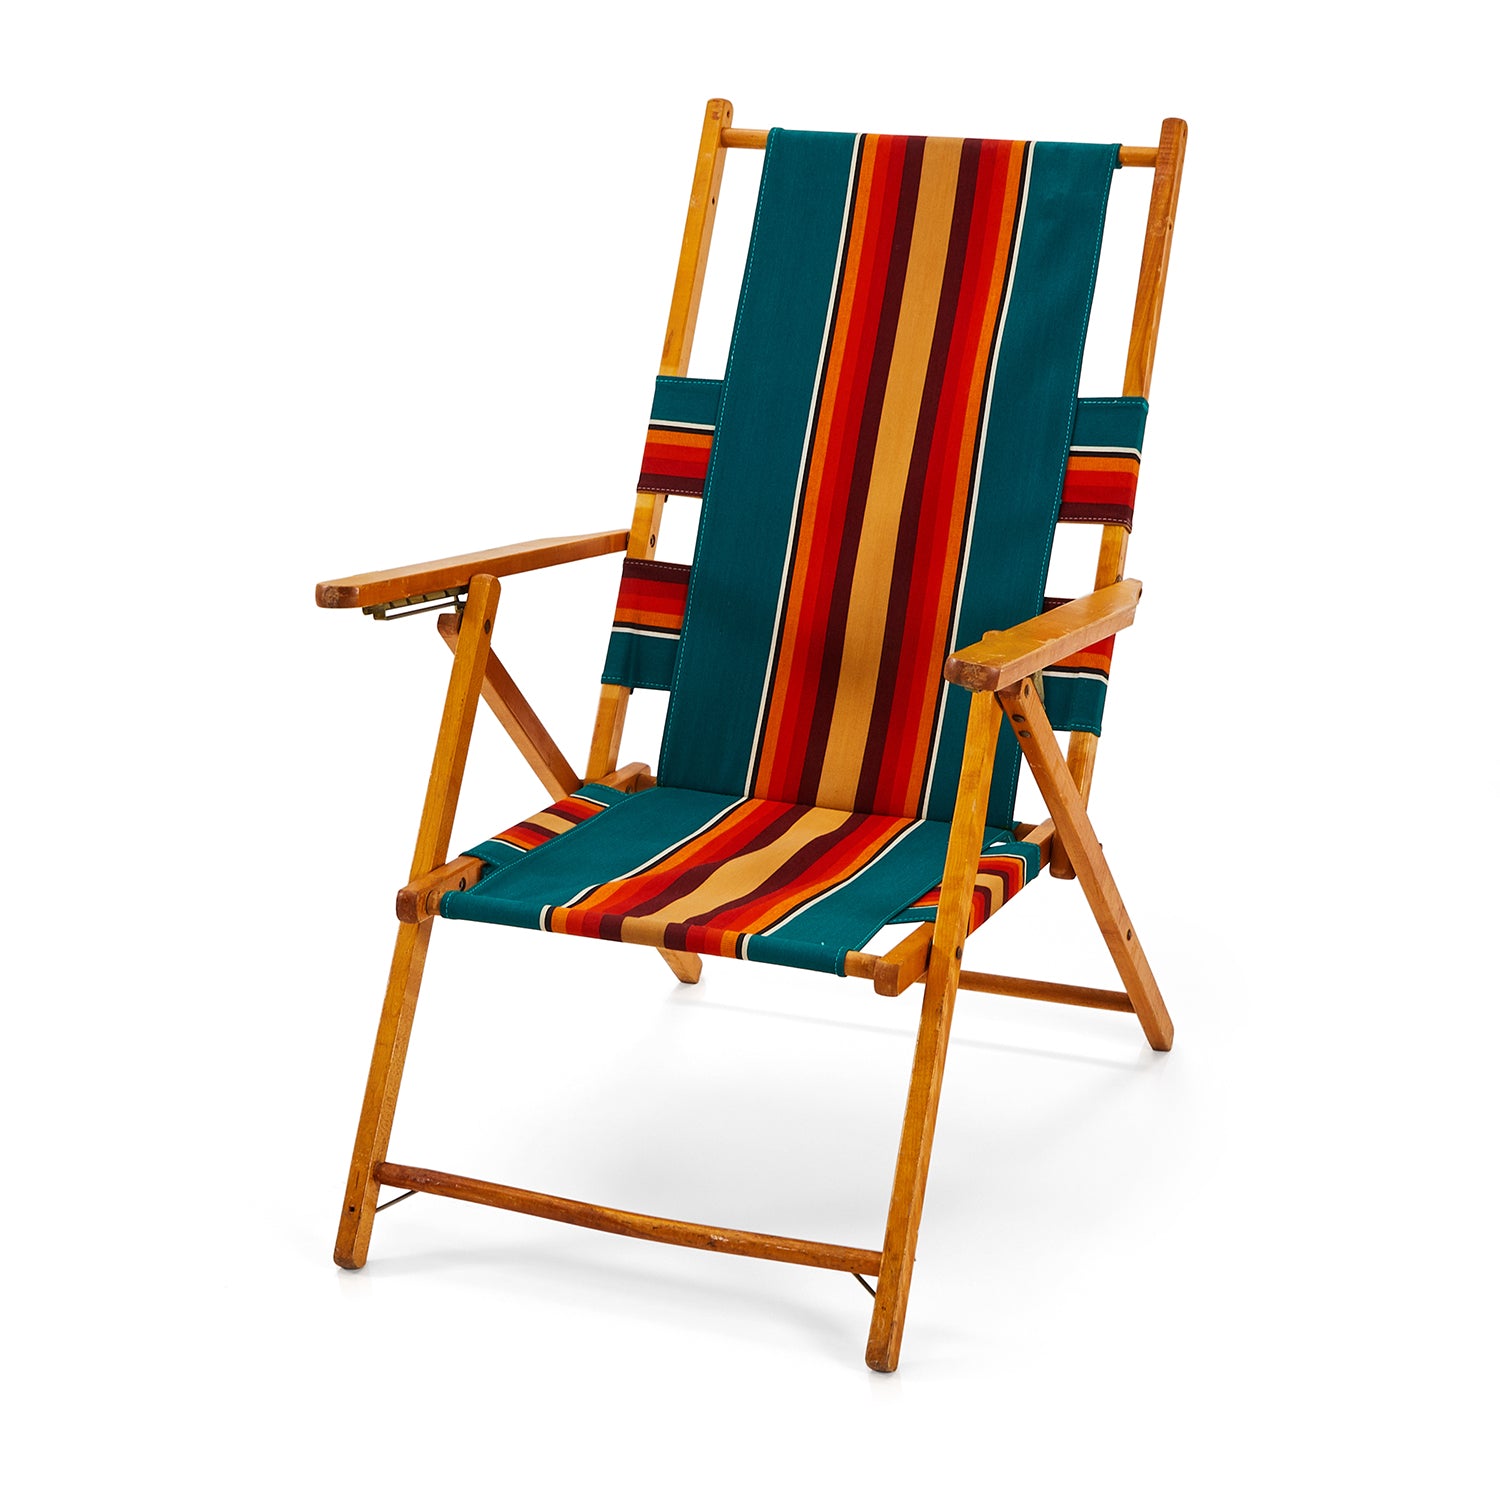 Minimalist Striped Beach Chair for Small Space